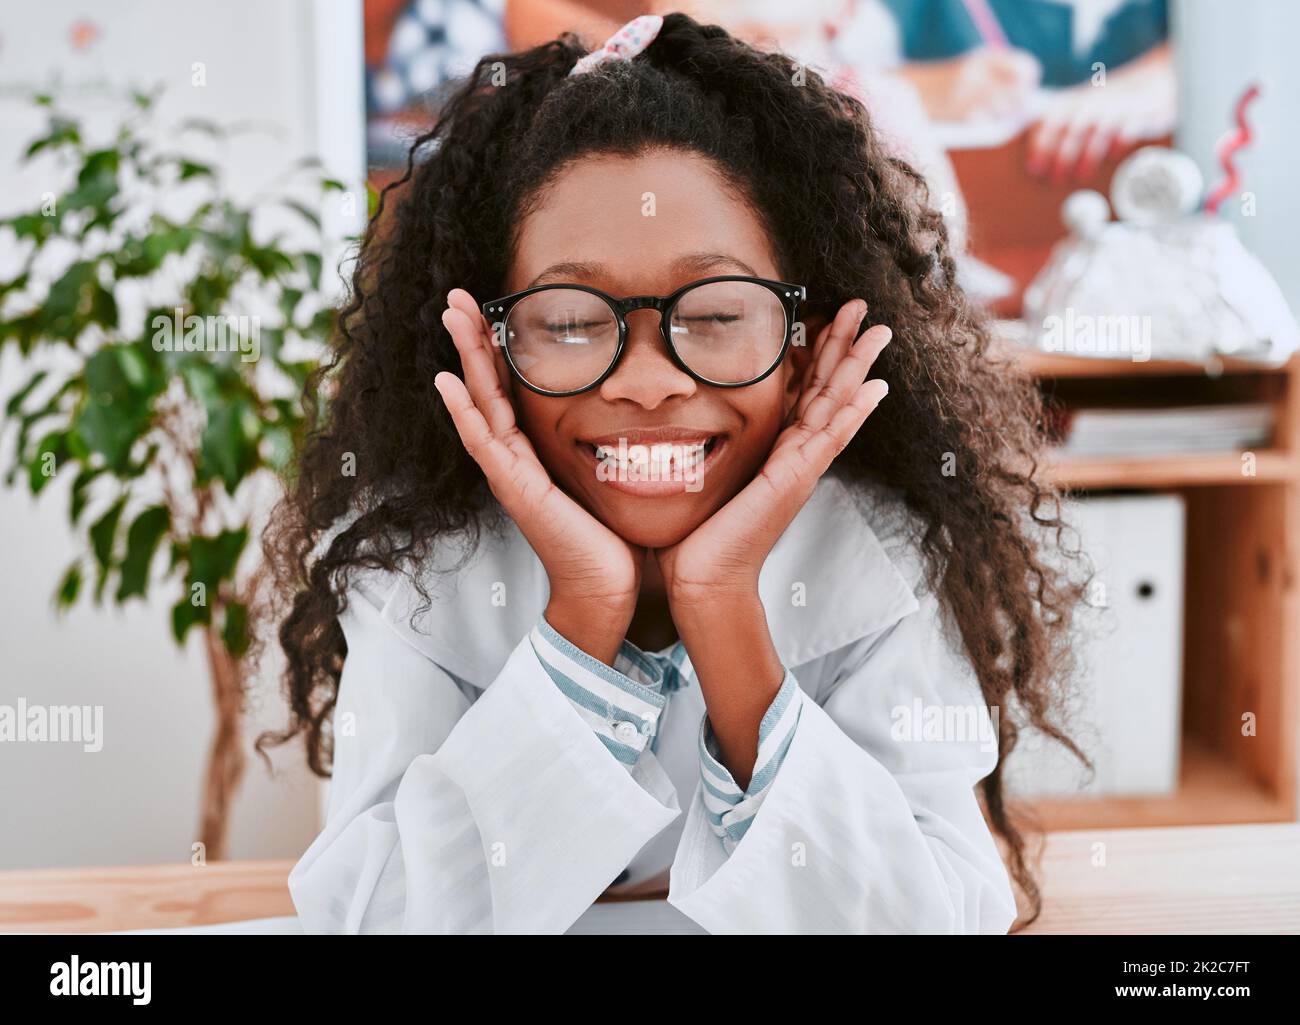 Why didnt anyone tell me science is so much fun. Portrait of an adorable young school girl feeling cheerful in science class at school. Stock Photo